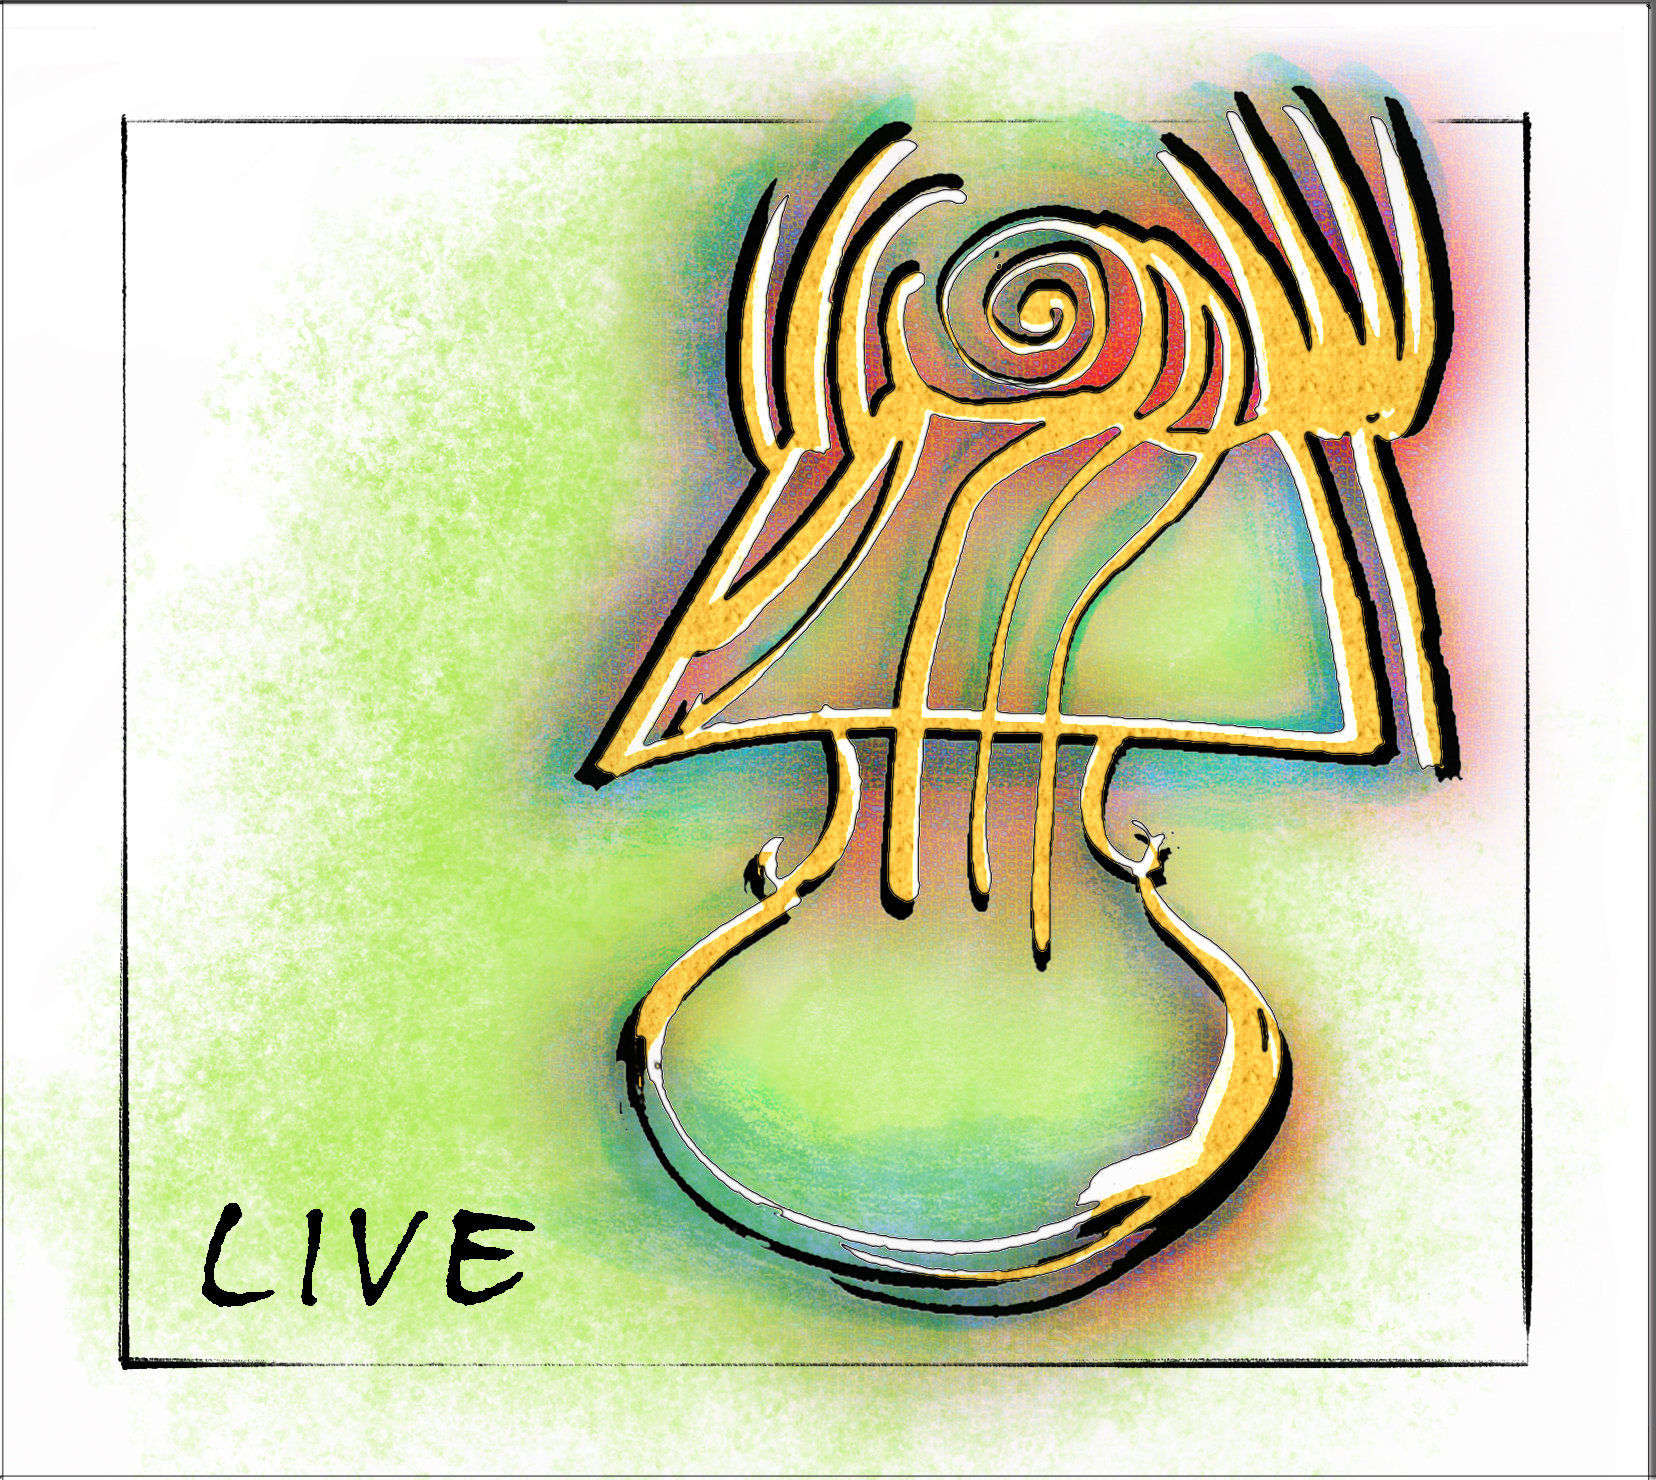 Unsere 21. CD „Live“